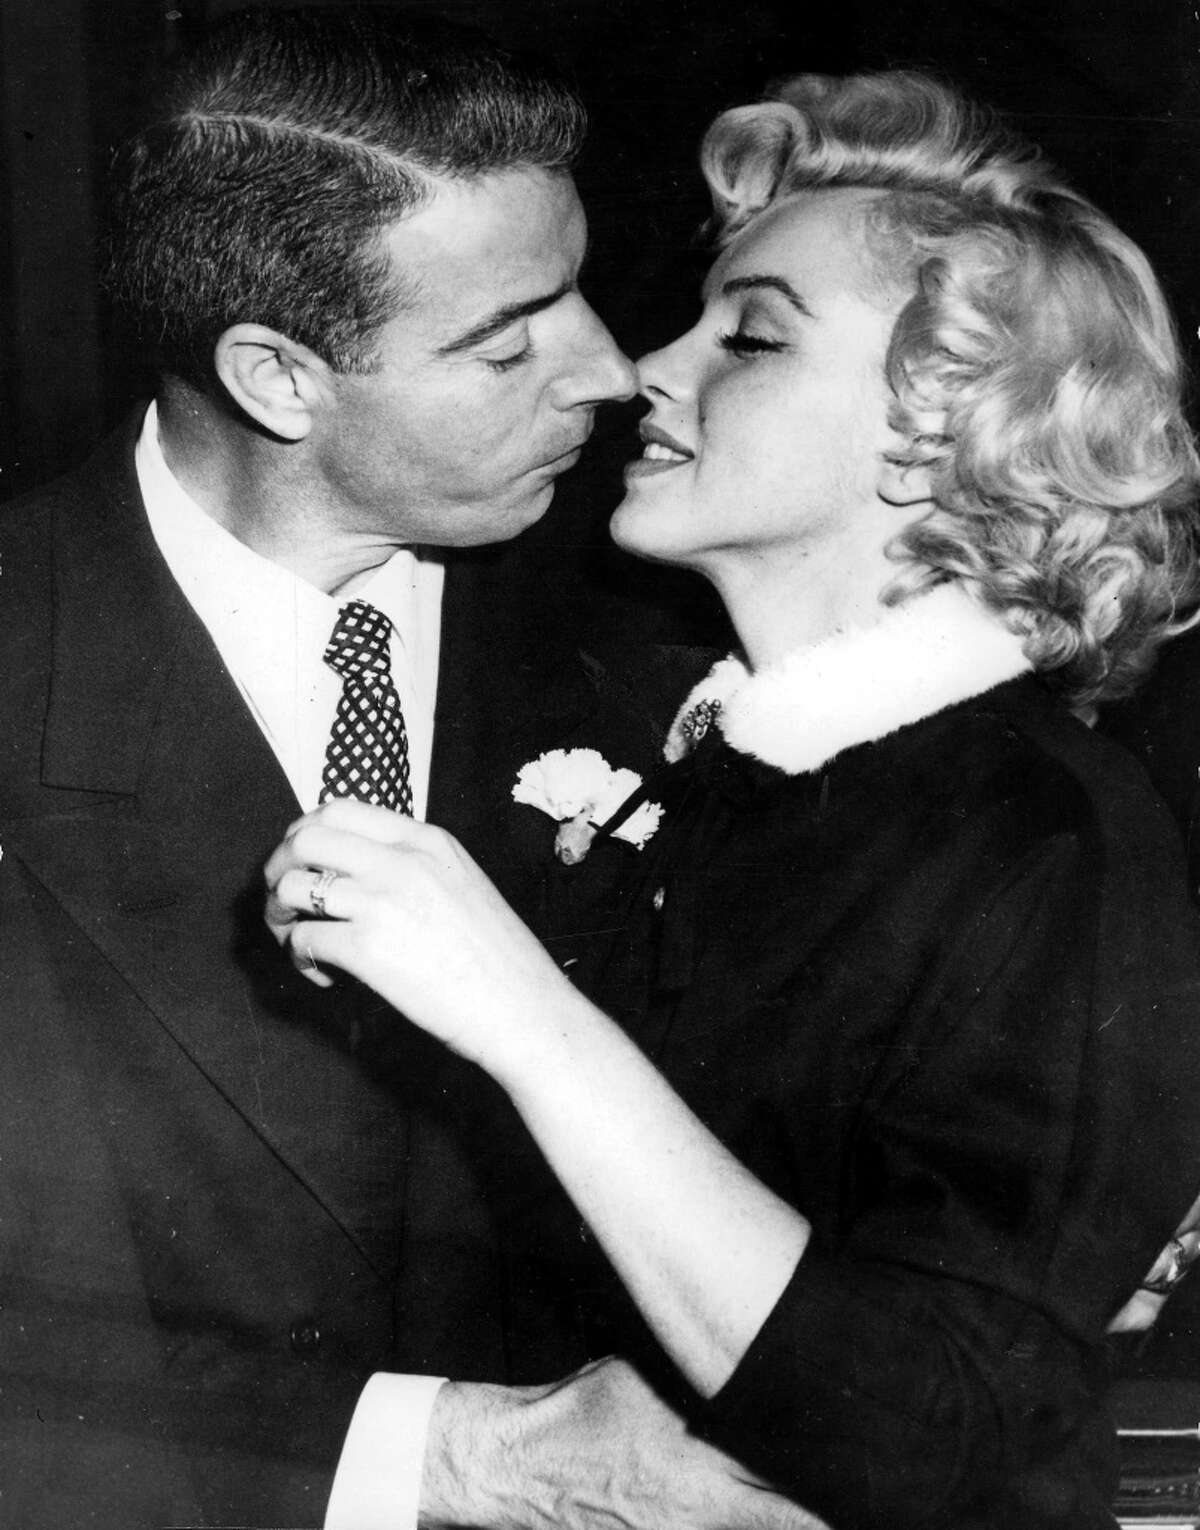 Marilyn Monroe and Joe DiMaggioIt doesn't get more American than this union: a blond bombshell actress and a beloved baseball player. Though the relationship had its ups and downs, as evidenced by the couple's divorce in 1954, the couple's union truly was 'til death do us part.' When Monroe died of a drug overdose in 1962, it was DiMaggio who claimed her body. He also had a dozen red roses delivered to her tombstone twice a week for the next 20 years.